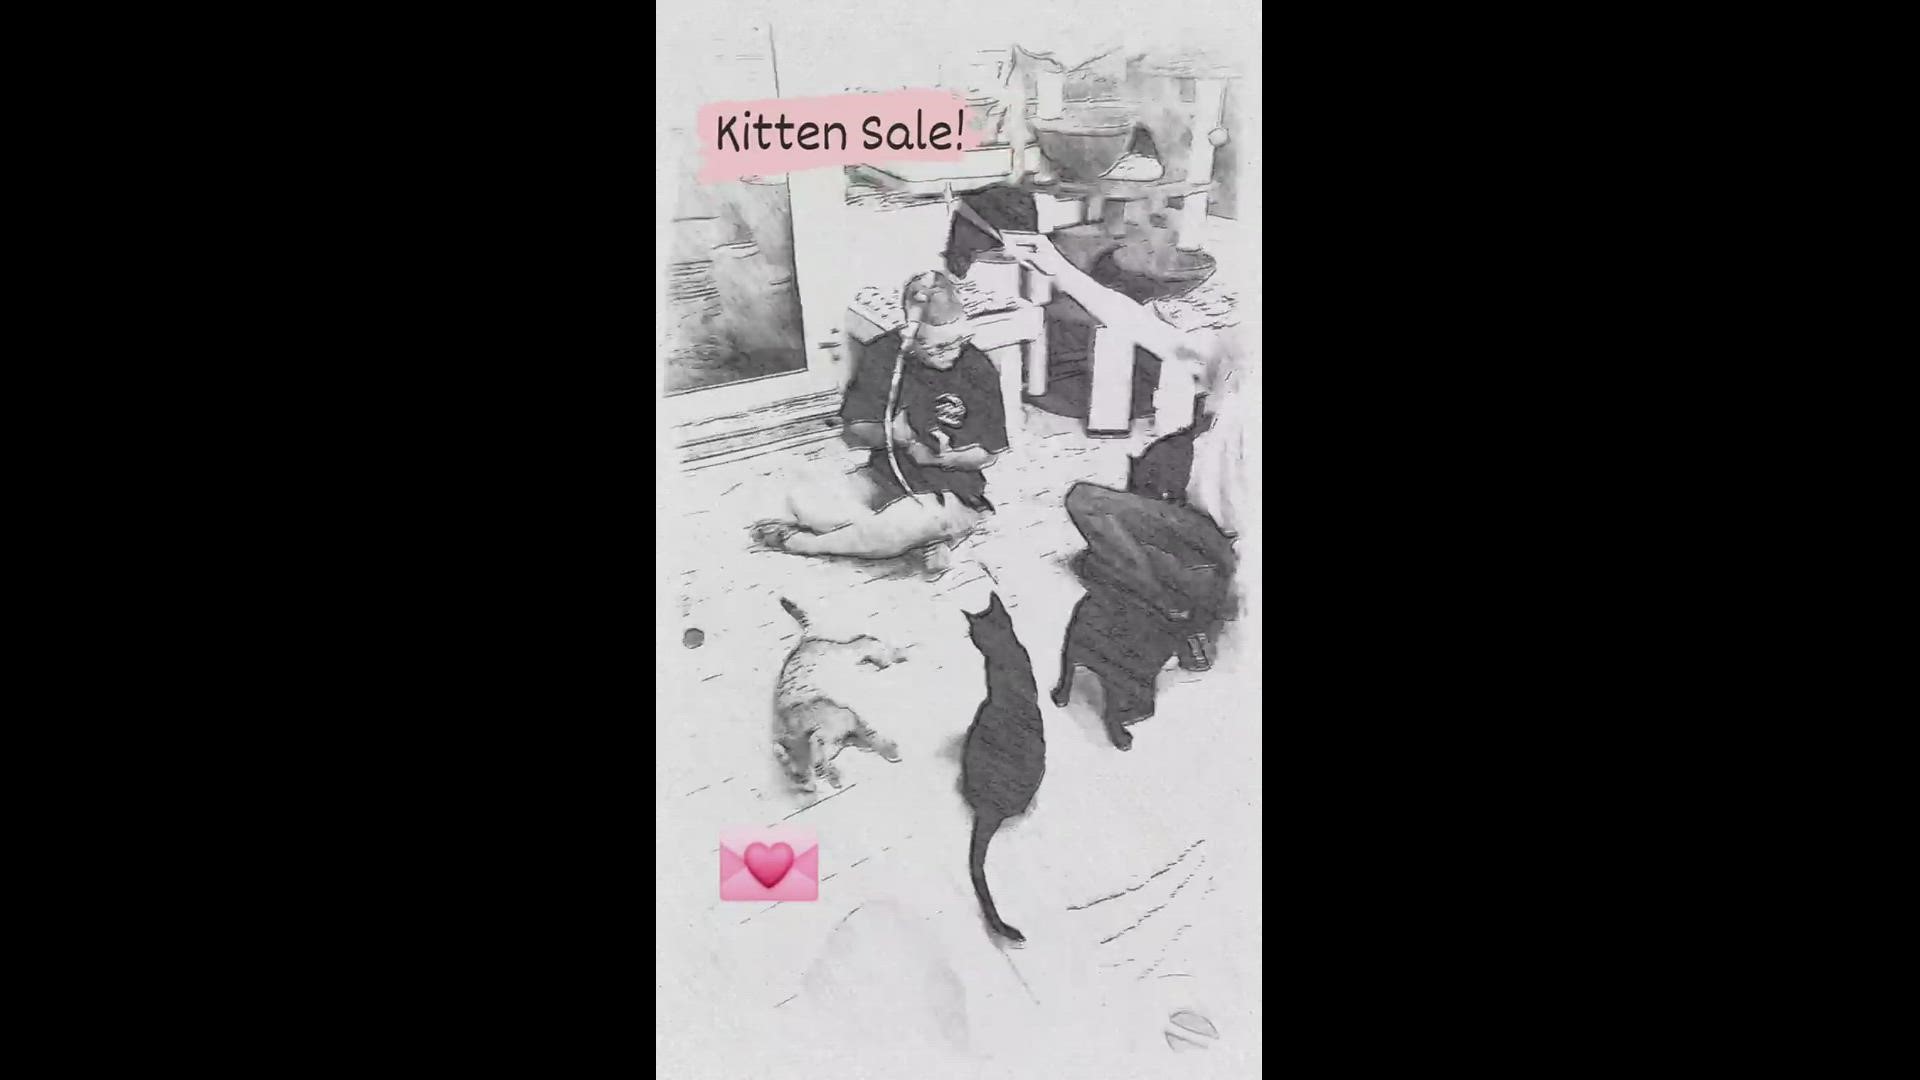 All kittens five months and older are on sale for half price!